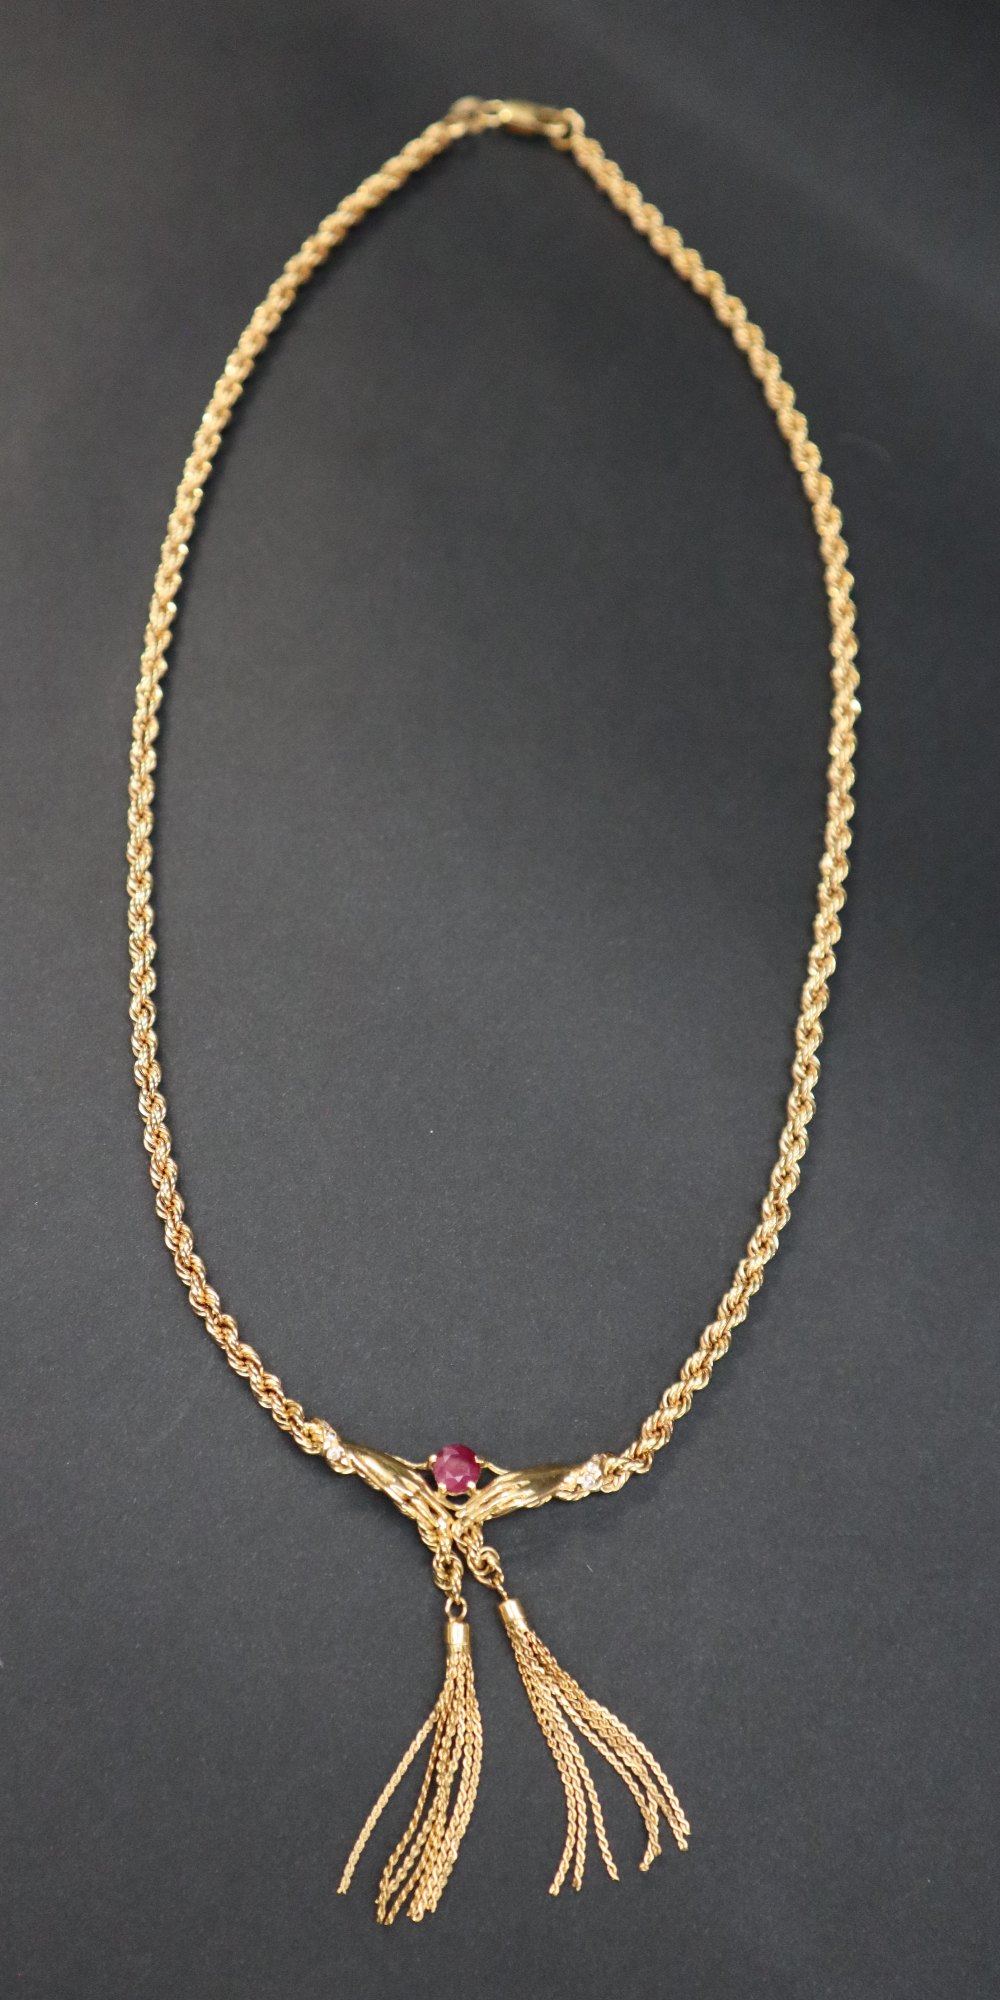 An 18ct yellow gold rope twist necklace, set with a ruby held between hands with tassels underneath, - Image 3 of 4